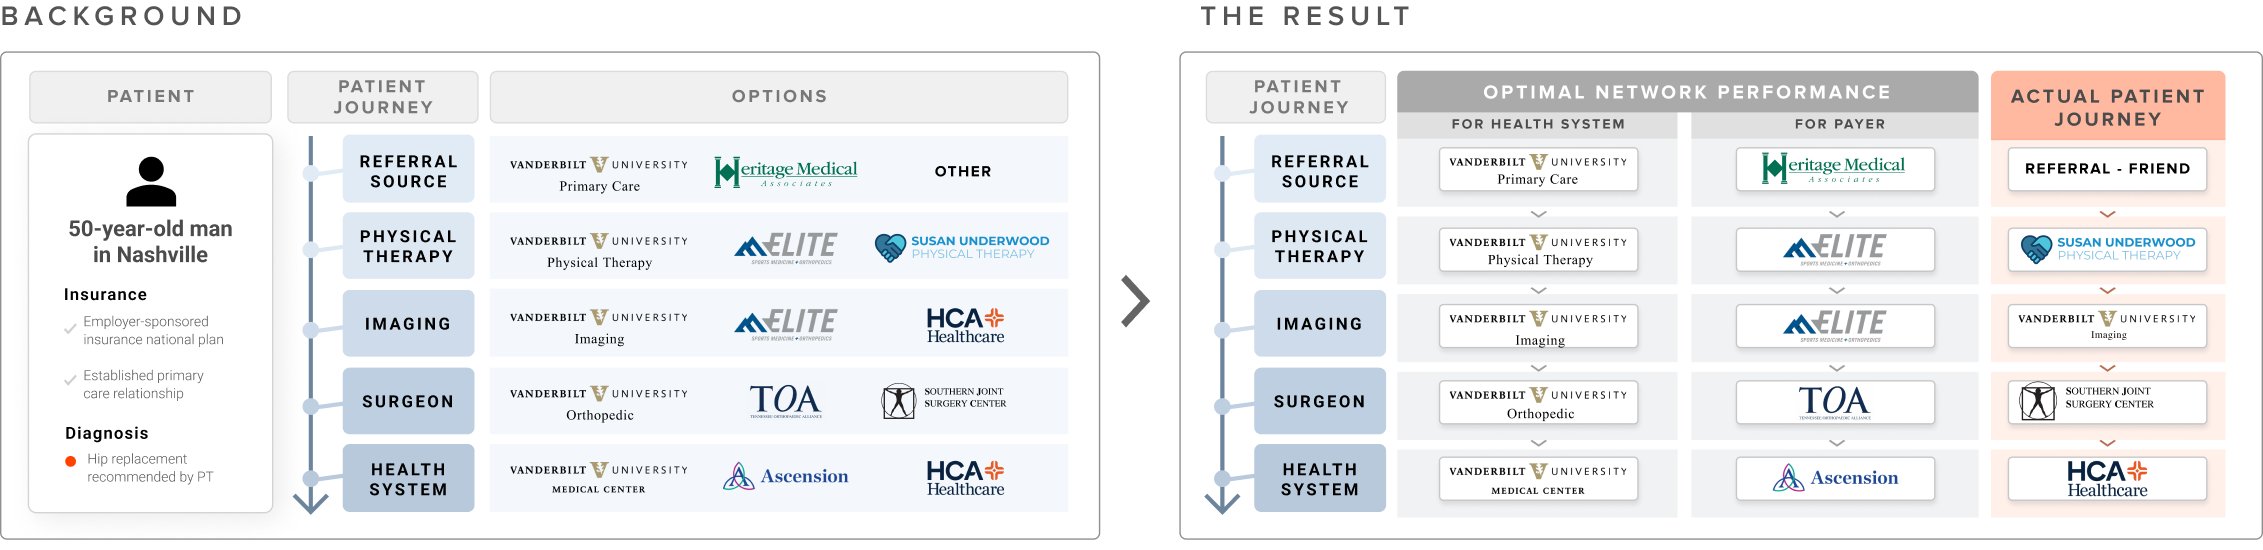 Provider Referral Decisions and Consumer Options Impact the Patient Journey